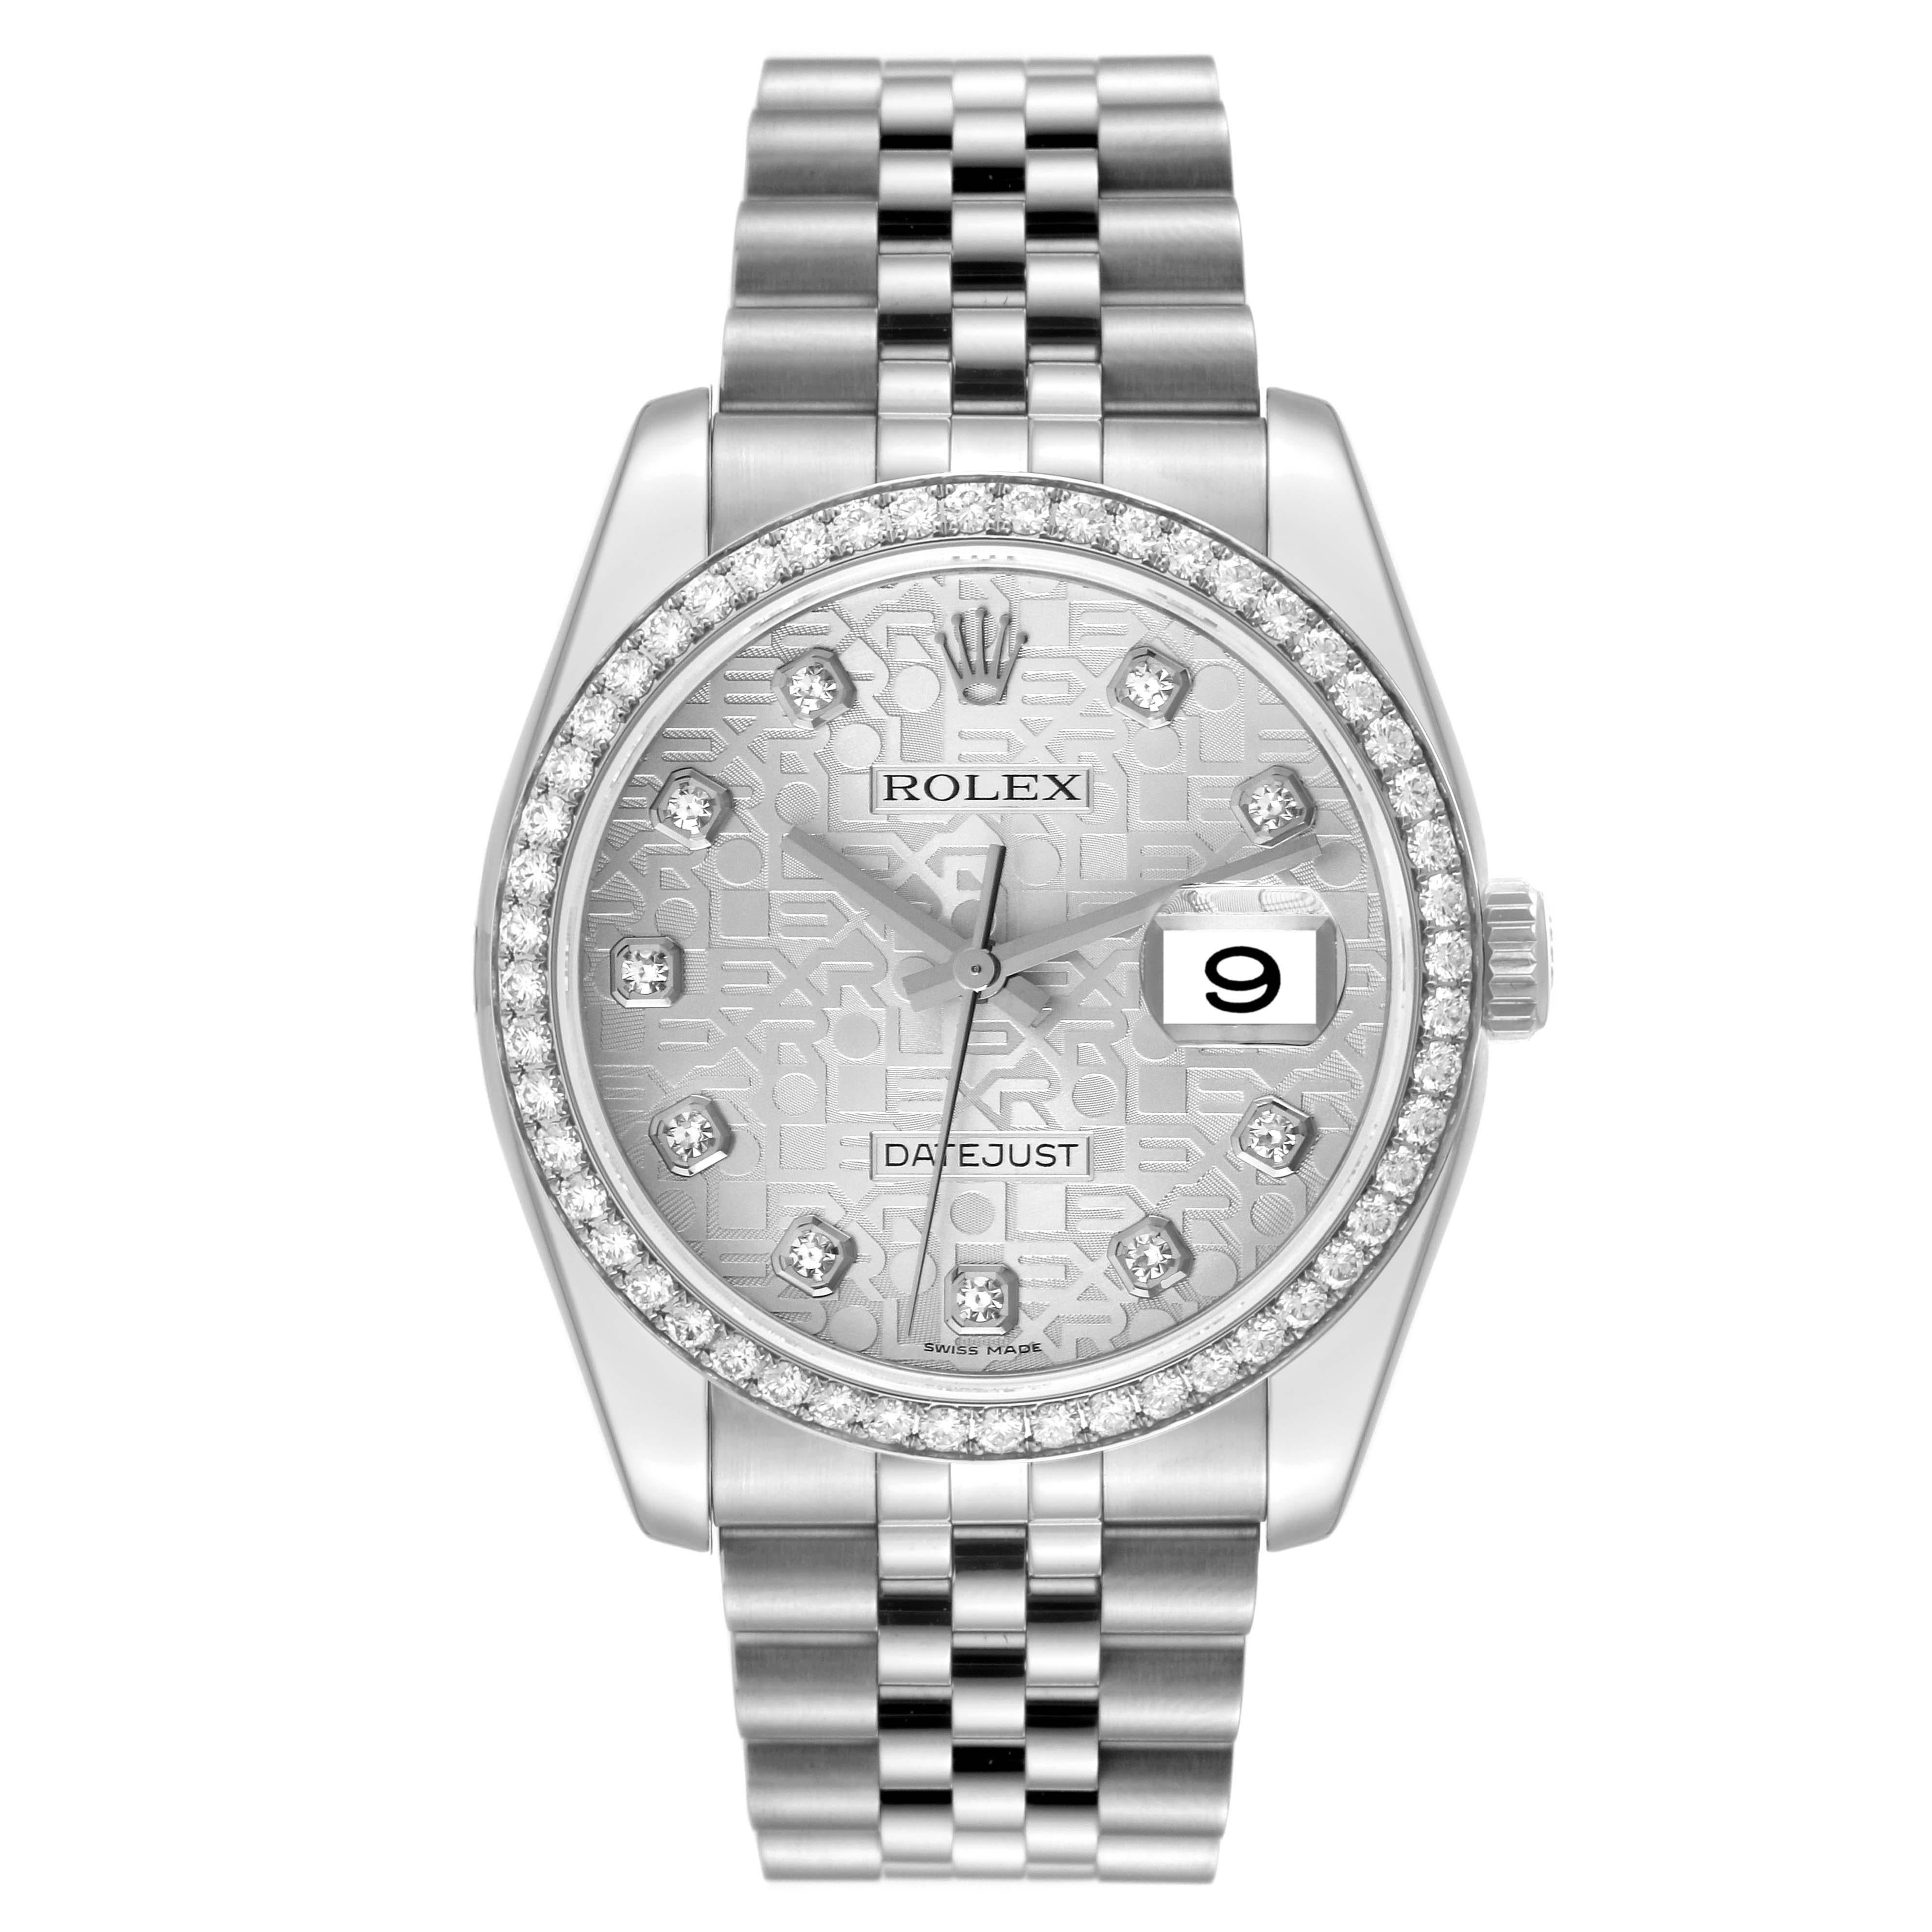 Rolex Datejust Silver Anniversary Dial Steel Diamond Mens Watch 116244. Officially certified chronometer self-winding movement with quickset date. Stainless steel case 36 mm in diameter.  Rolex logo on a crown. Original Rolex factory diamond bezel.